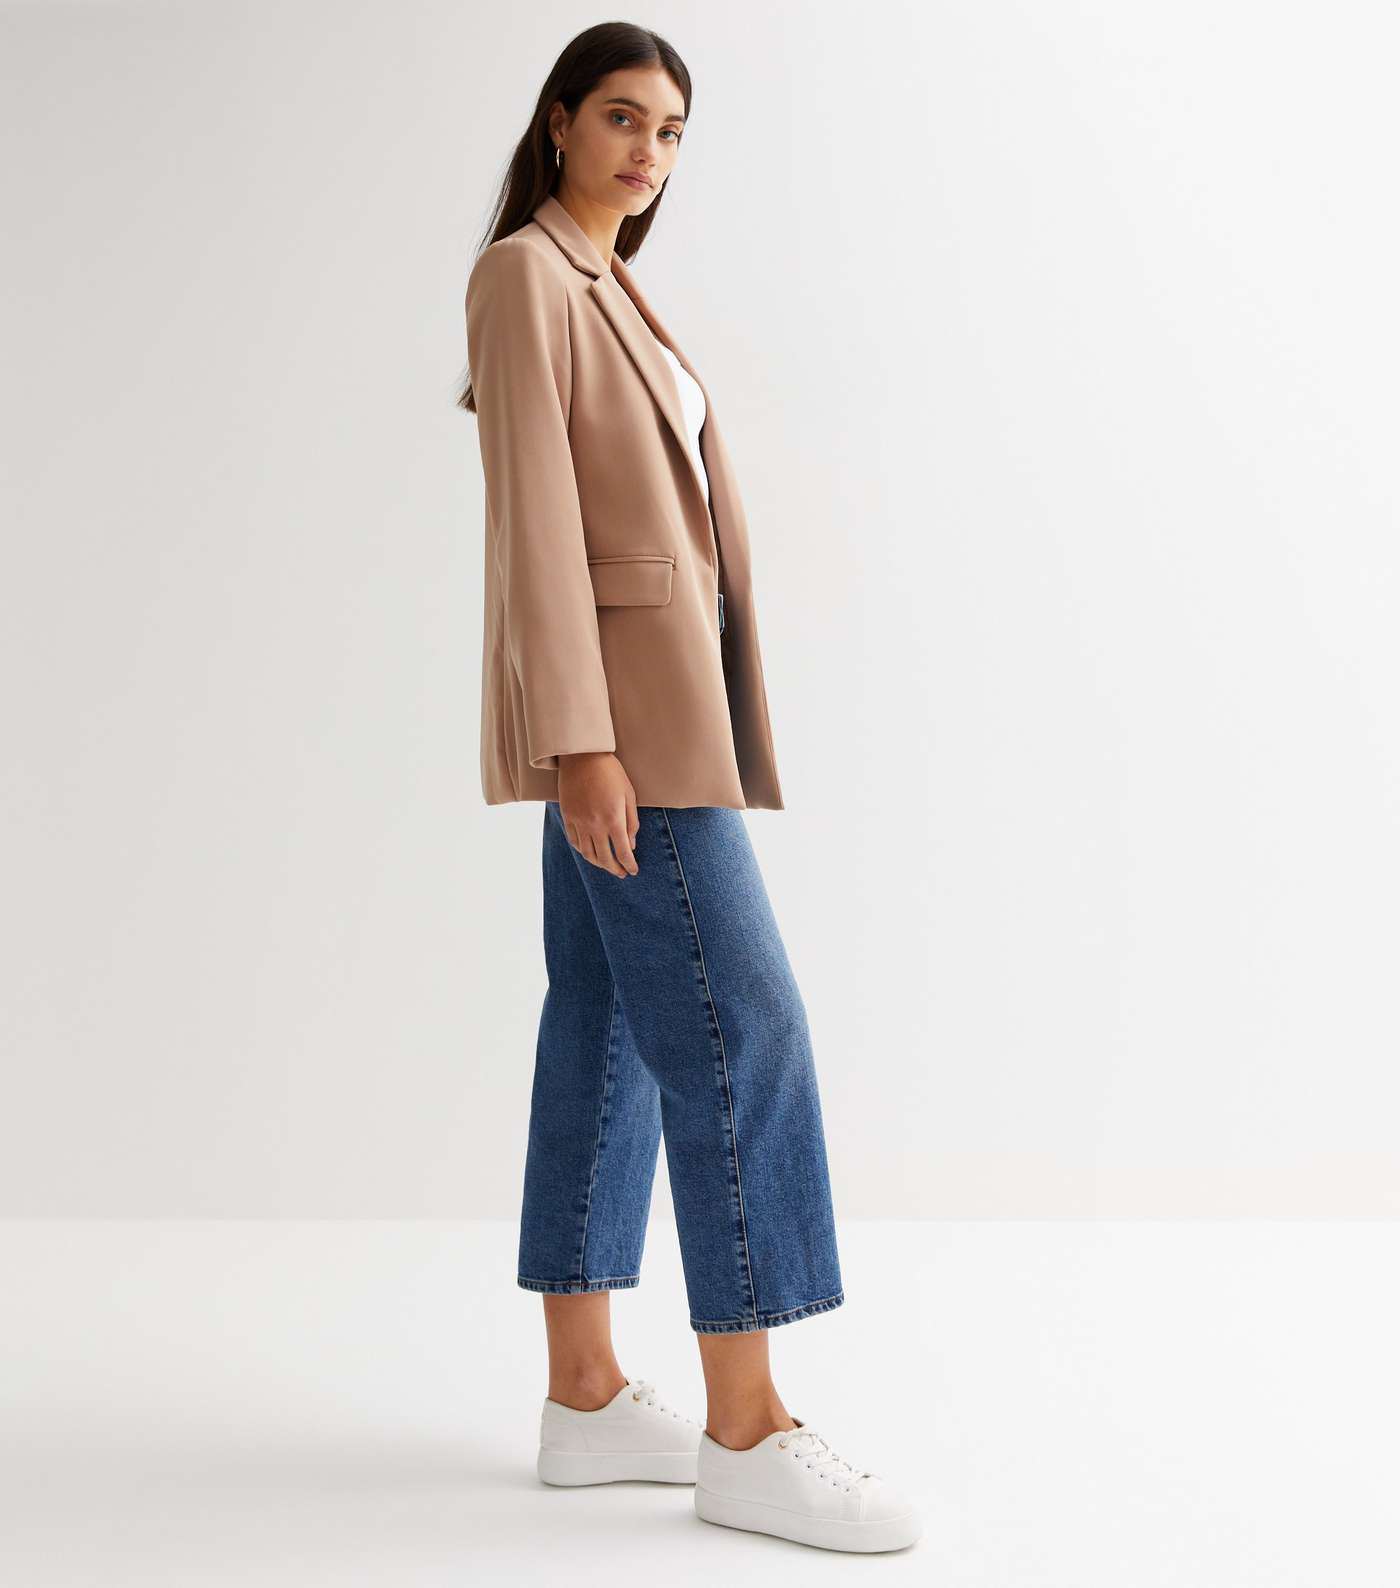 Camel Relaxed Fit Blazer Image 2